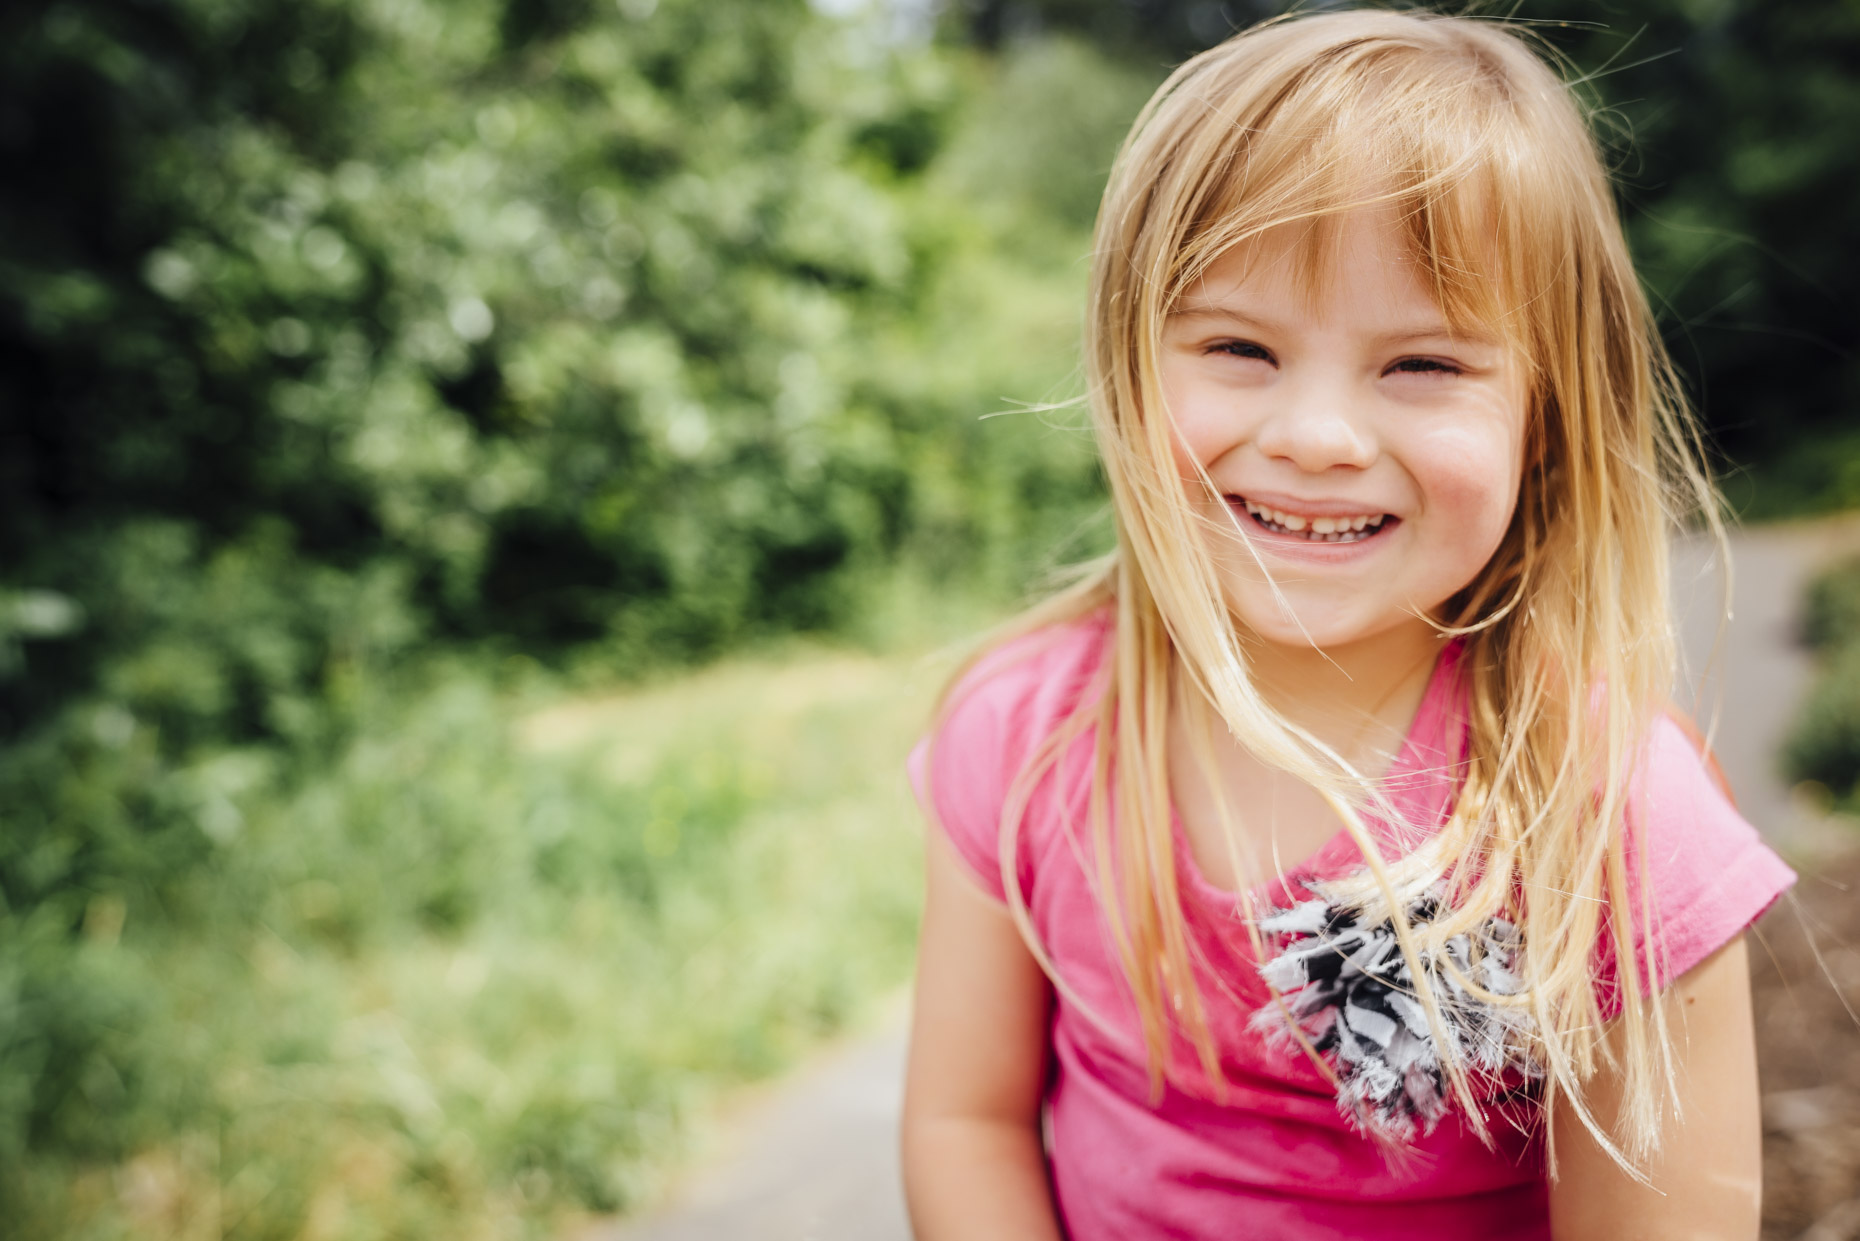 Smiling blonde girl with down syndrome playing outside